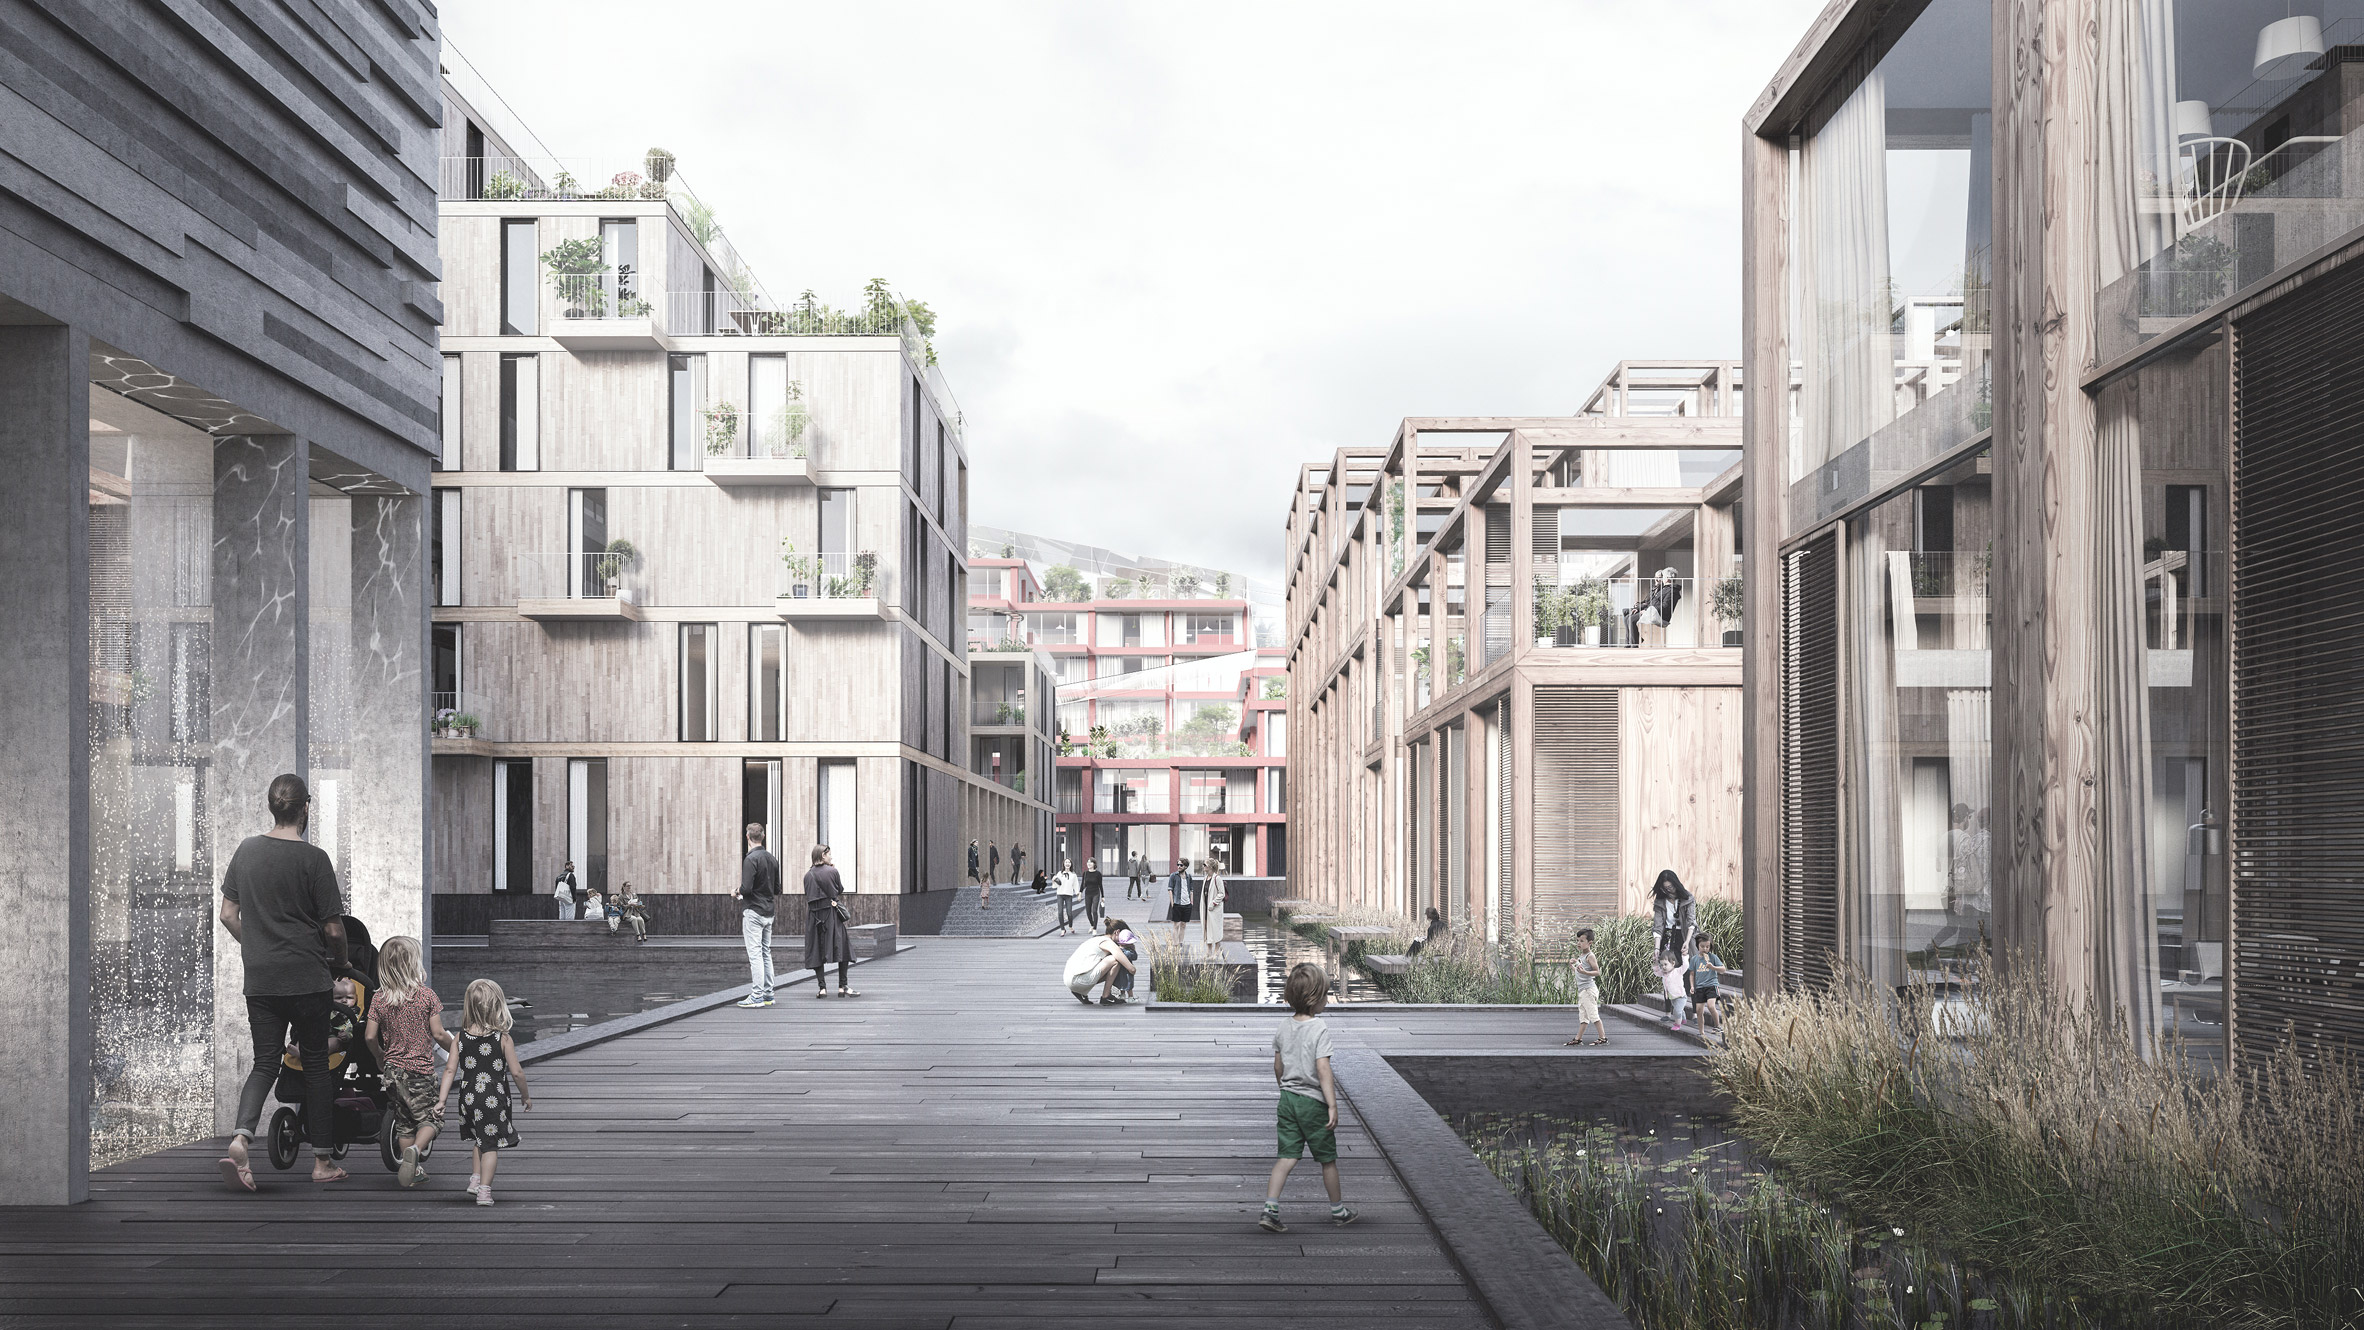 UN17 Village to be built in Copenhagen with recycled materials by Lendager Group and Årstiderne Arkitekter